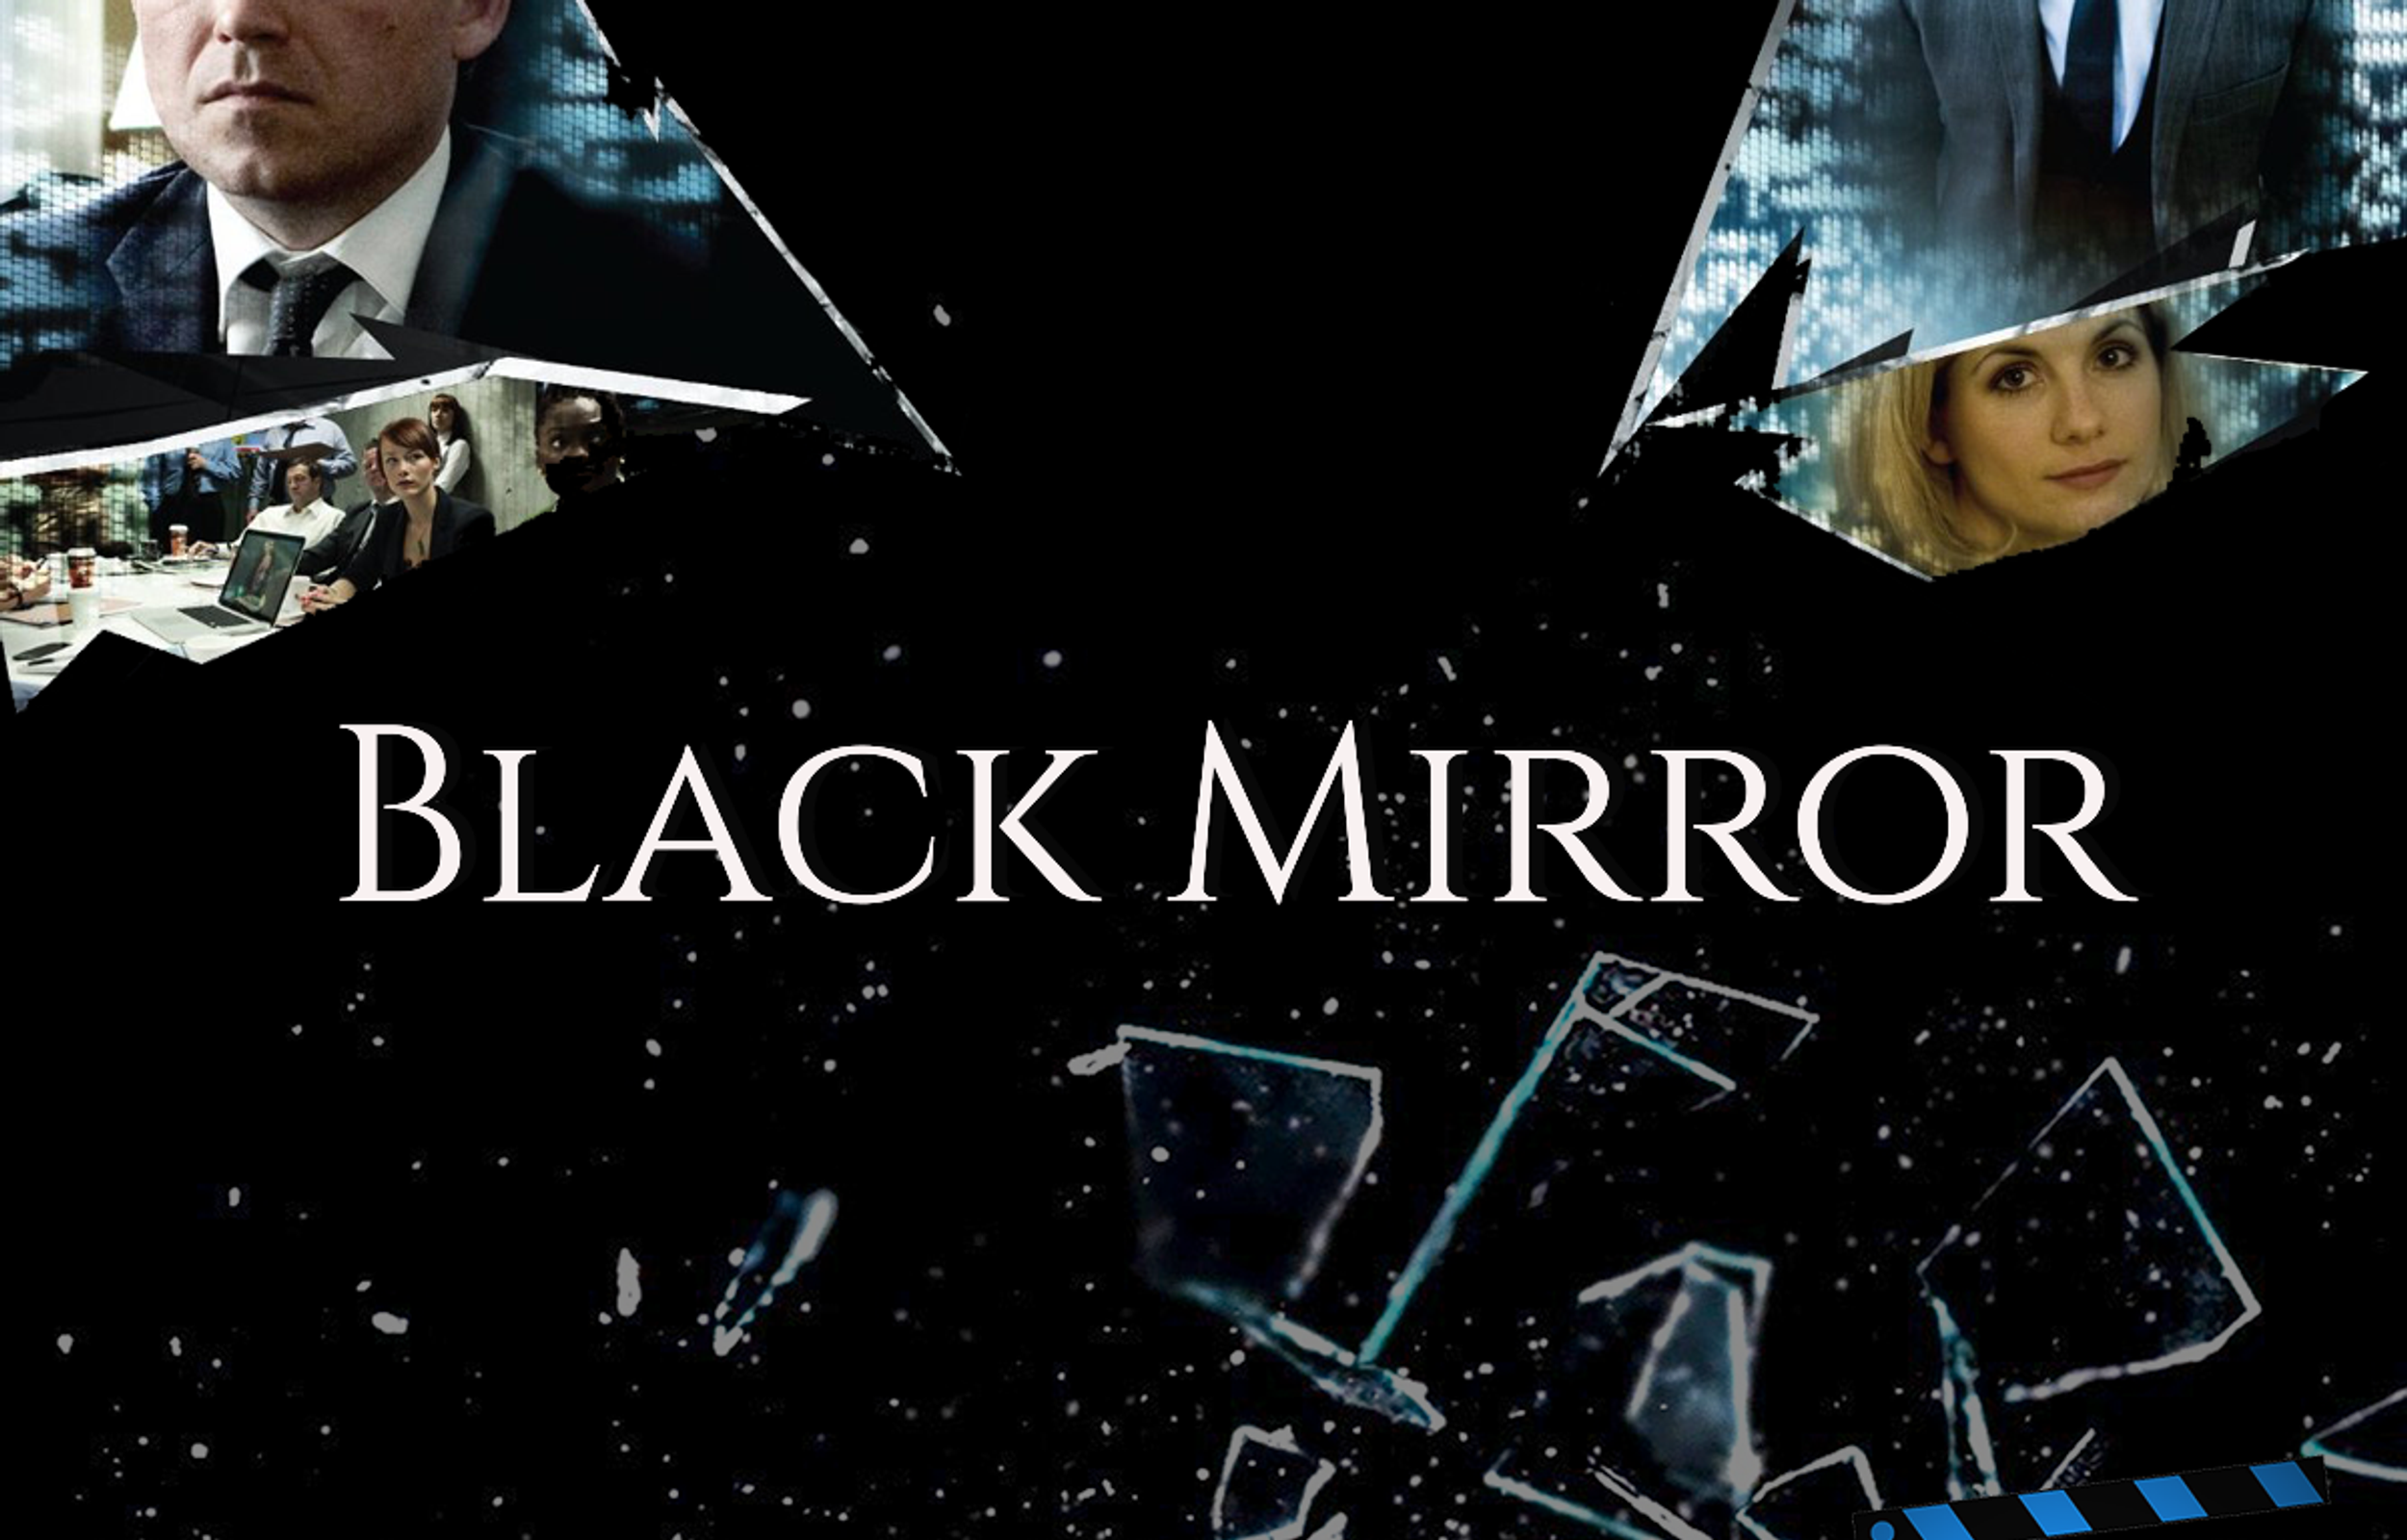 To The College Student Who Needs A New Netflix Binge: A Review on Black Mirror